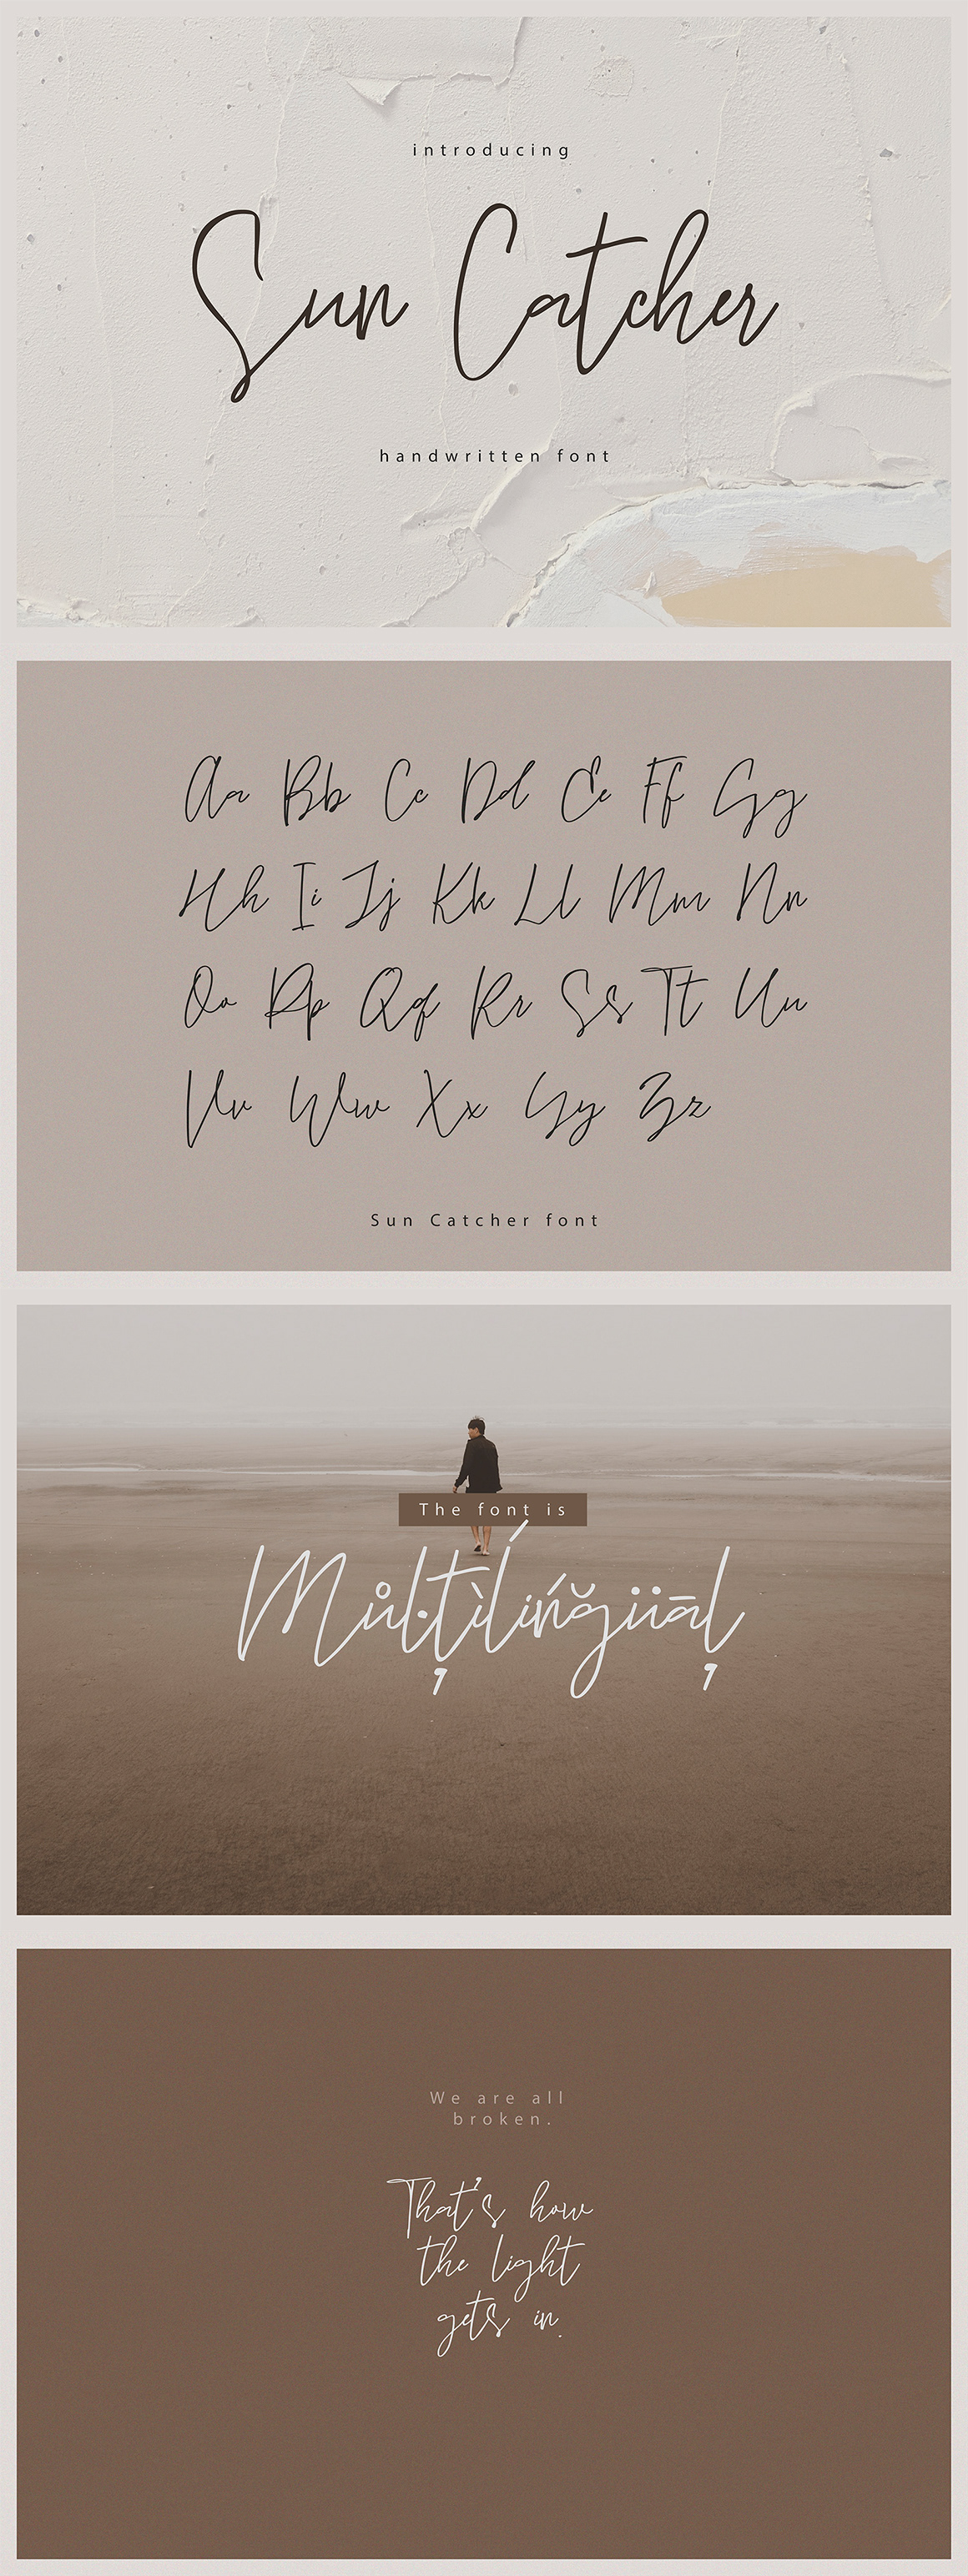 handwriting handwritten Script lettering Quotes handmadefont funny funky font cute font handdrawn